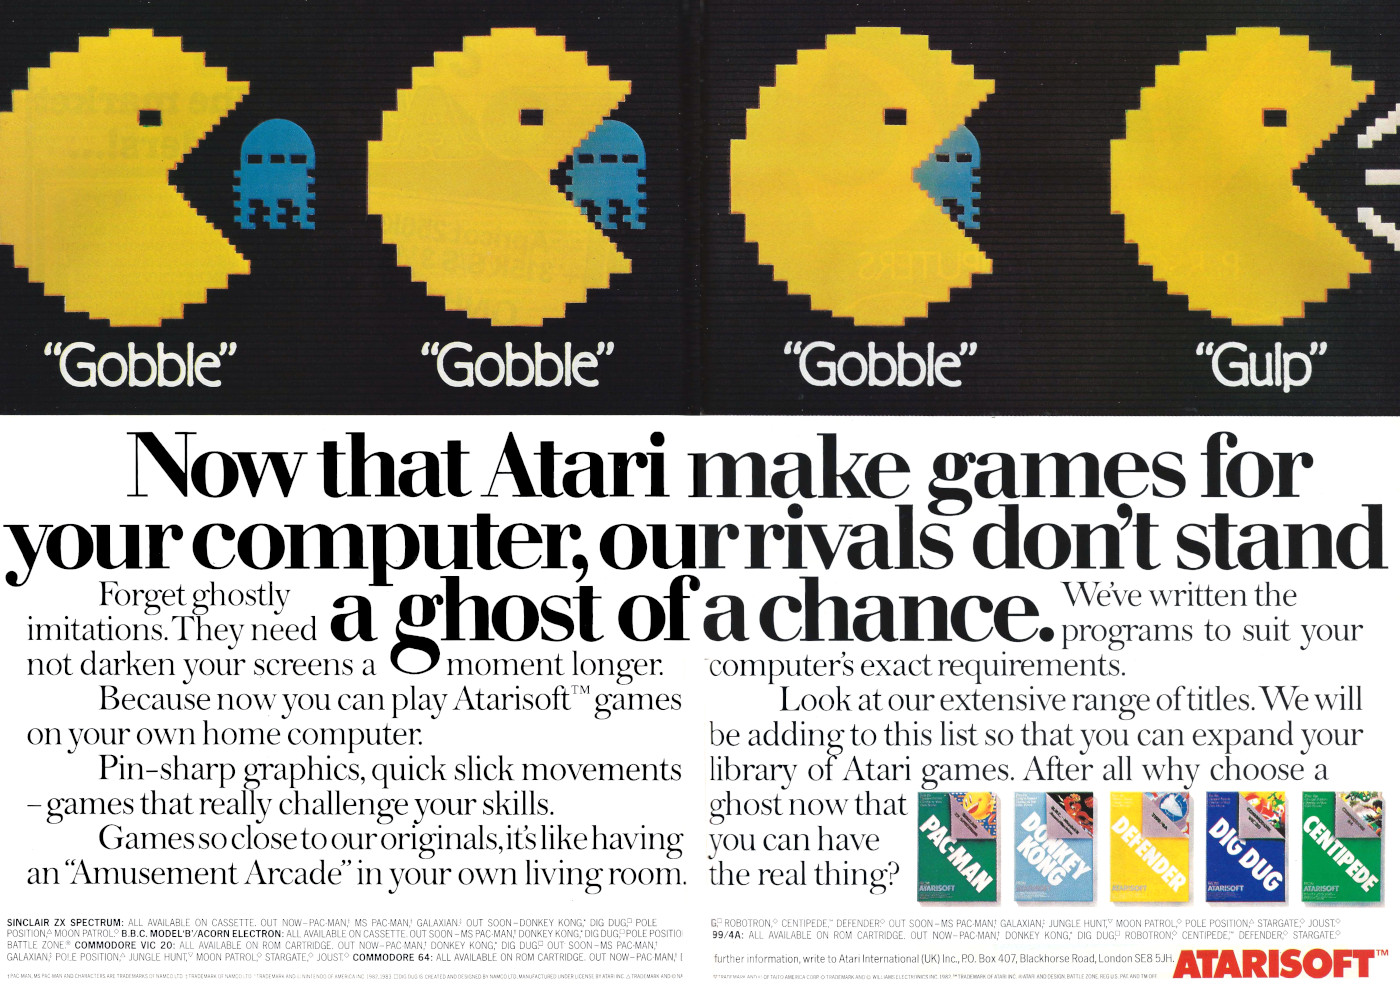 An advert f<span class='hilite'>rom</span> Atarisoft, which features a dig at clones of the company's games, like Commodore's version of Pac-Man, which it called Jelly Monsters after legal pressure f<span class='hilite'>rom</span> Atari. F<span class='hilite'>rom</span> Personal Computer World, March 1984